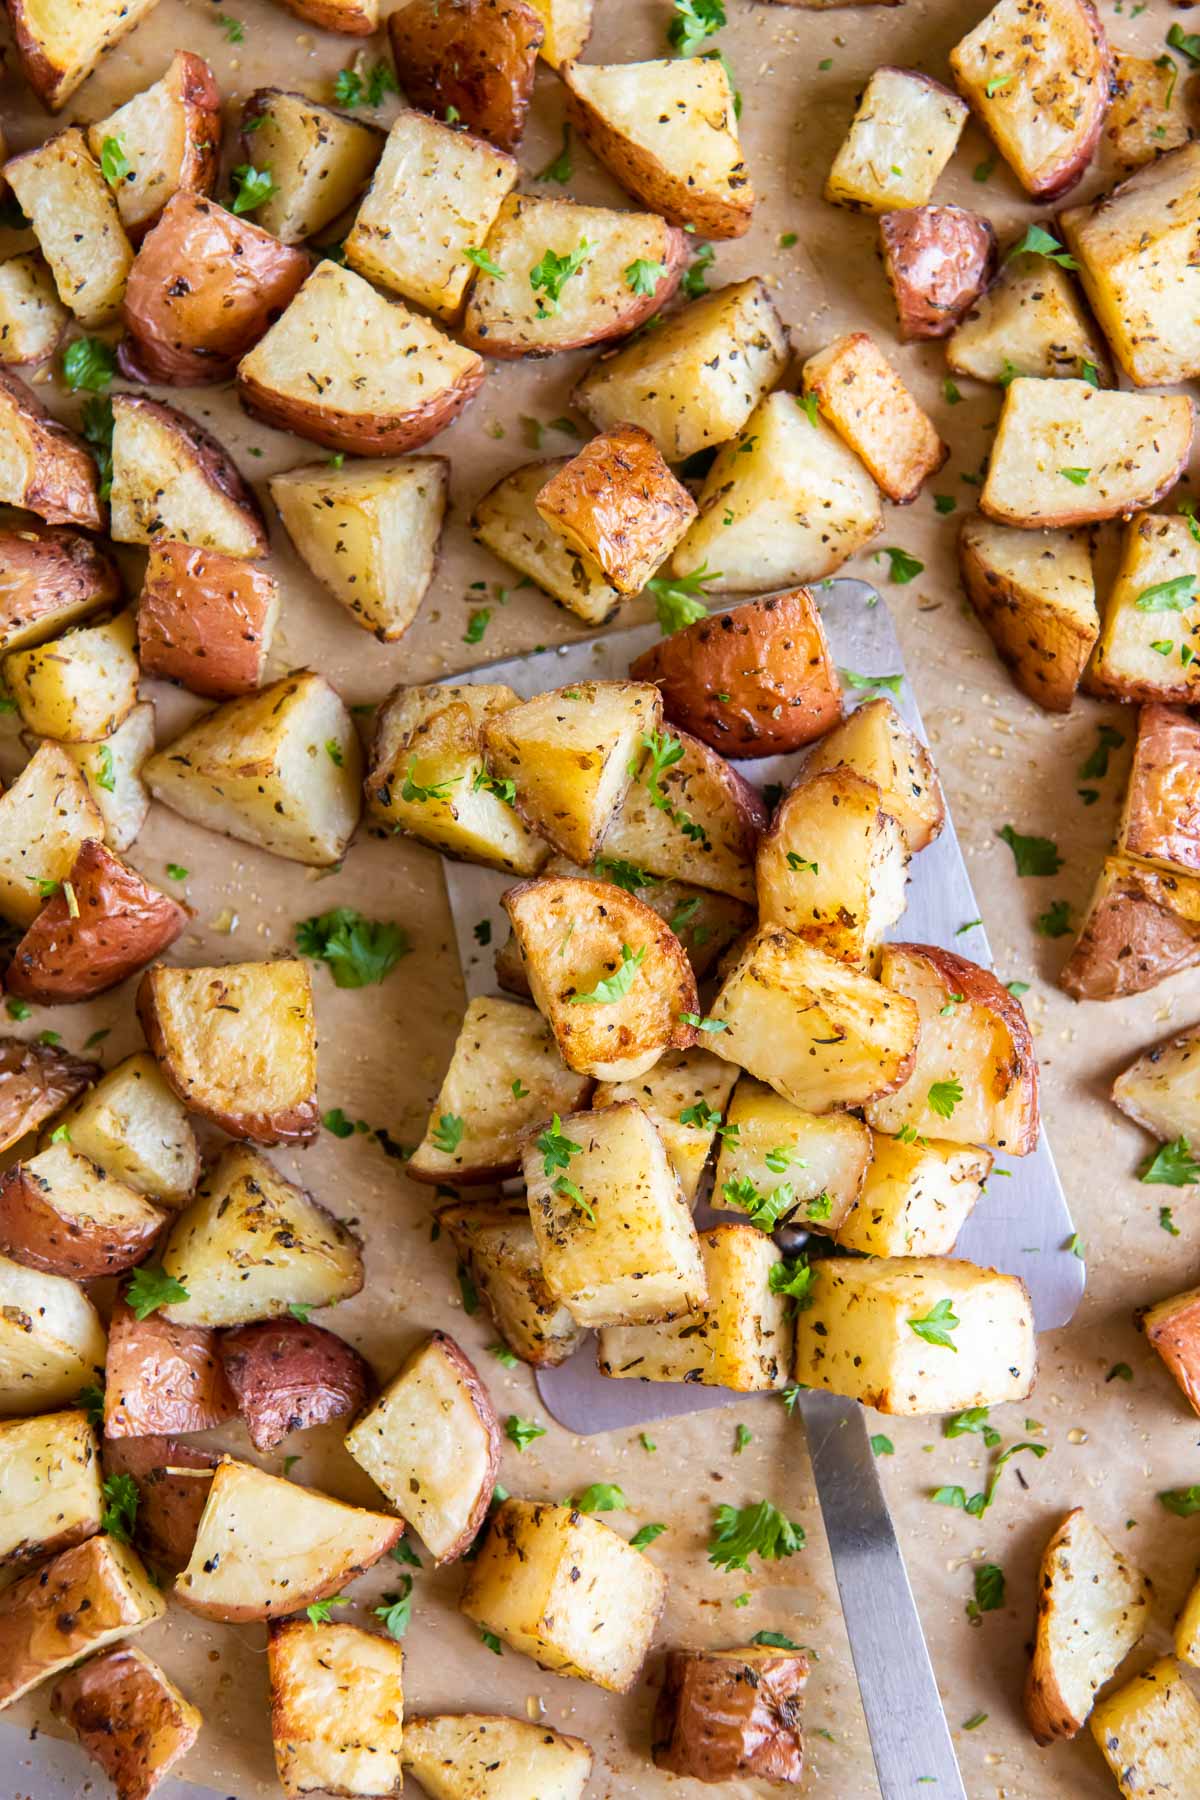 Roasted Red Potatoes - Kristine's Kitchen